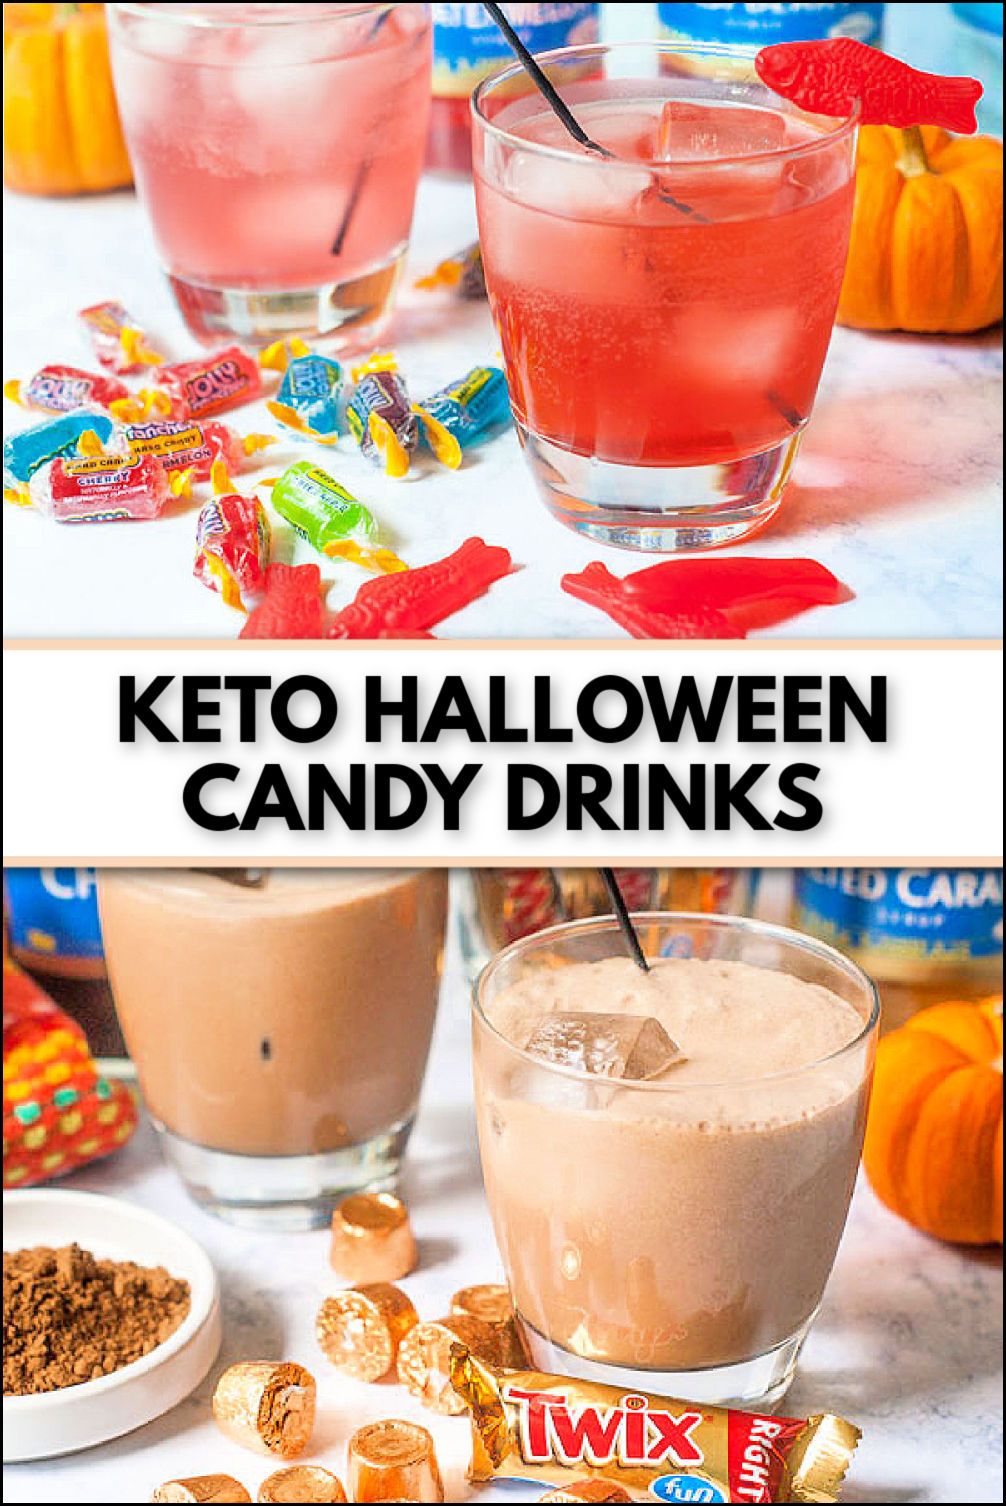 keto halloween candy drinks with scattered candy around them and text